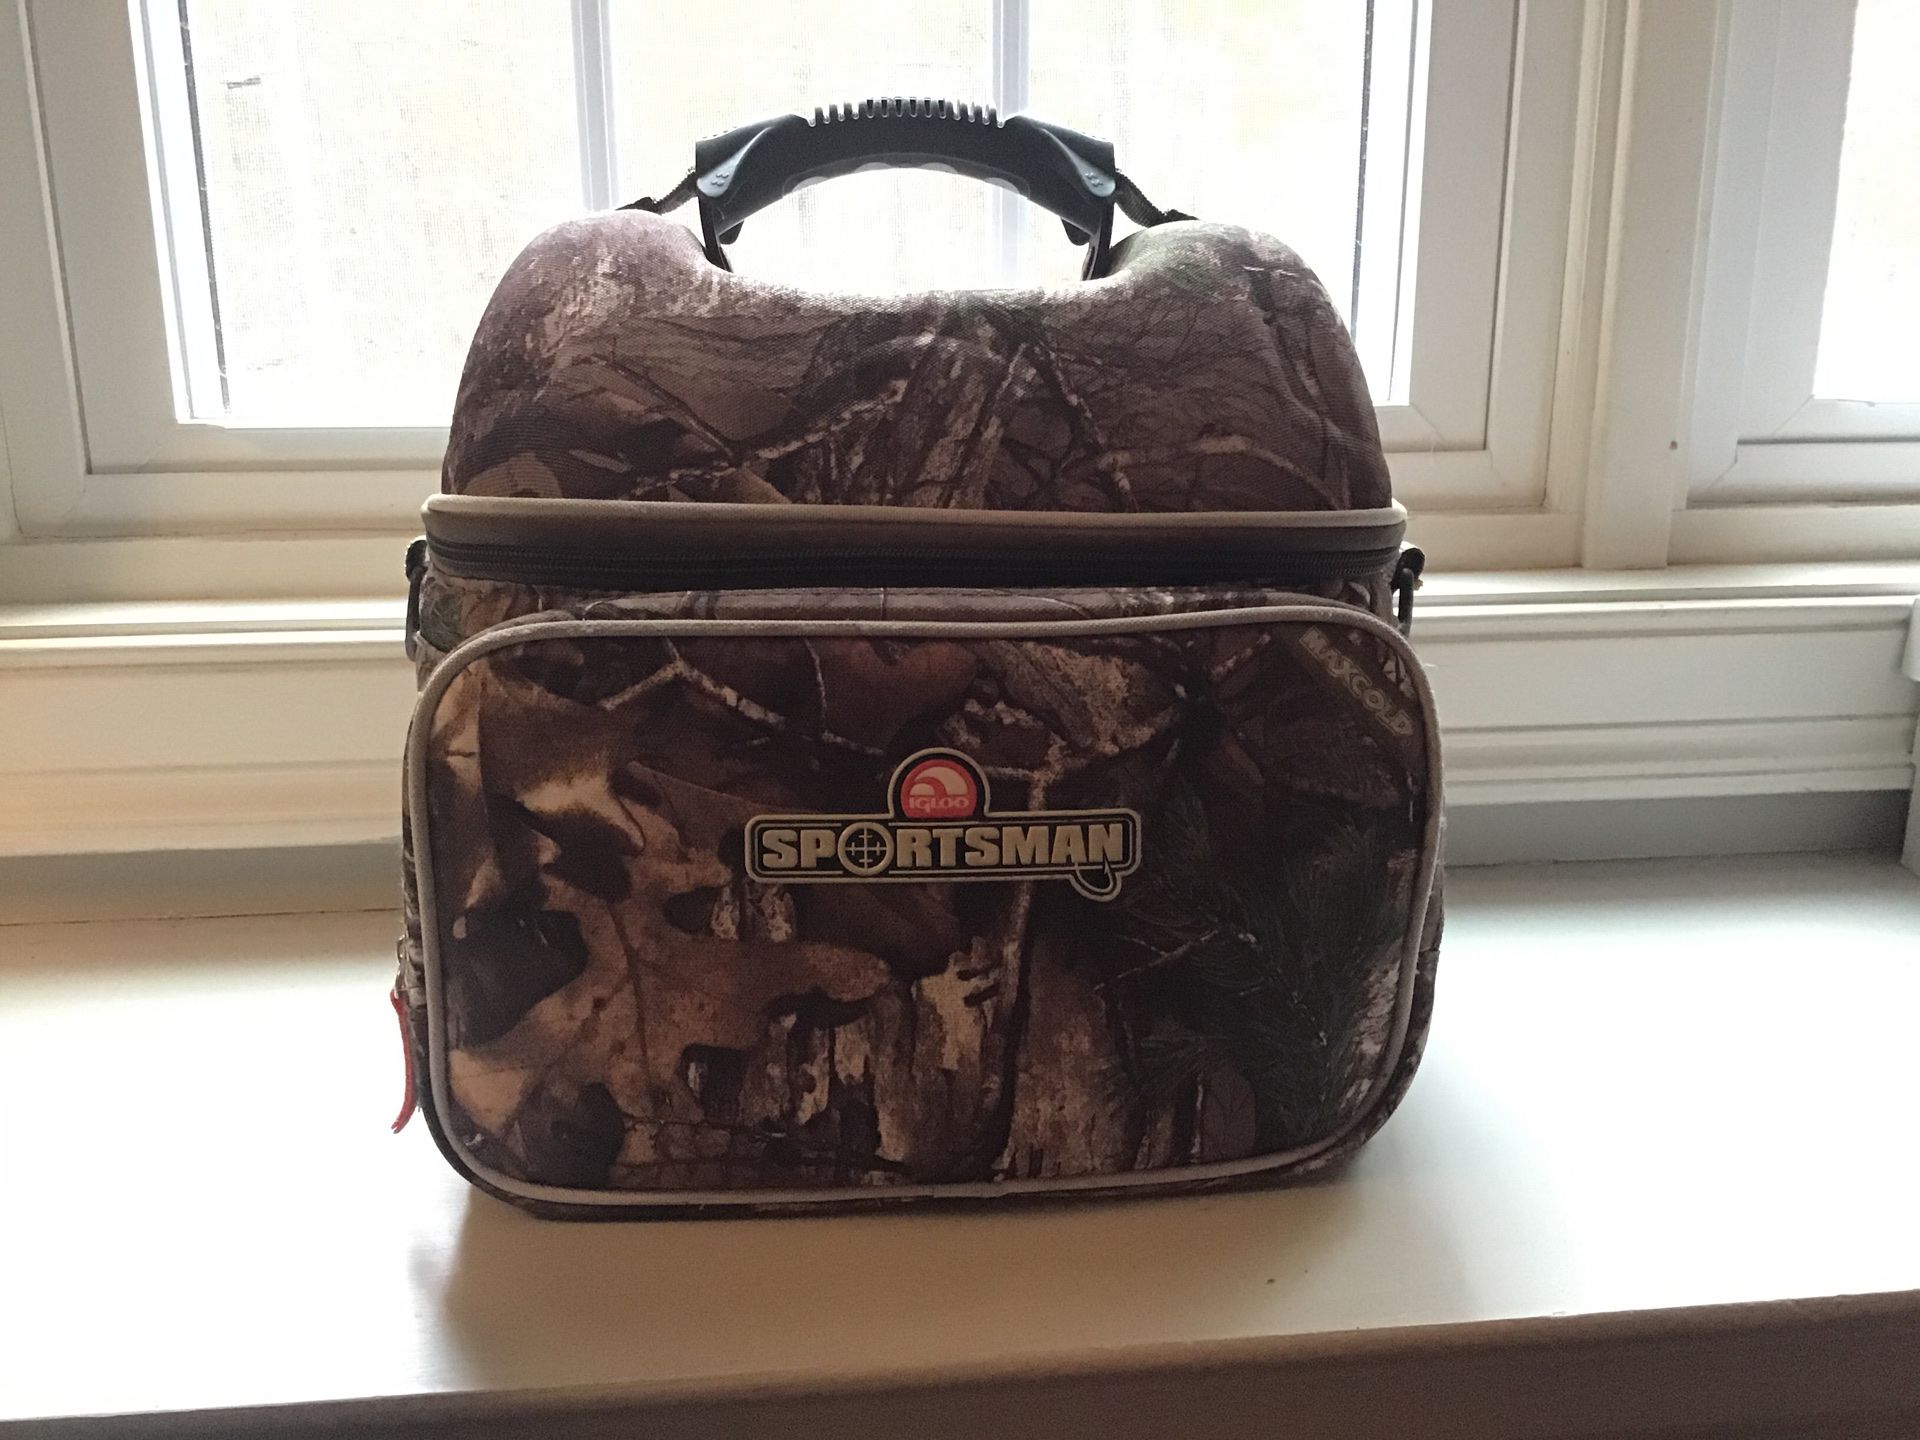 Igloo Sportsman Realtree 12 can cooler/lunch box. Got this a while ago. Brand New never used